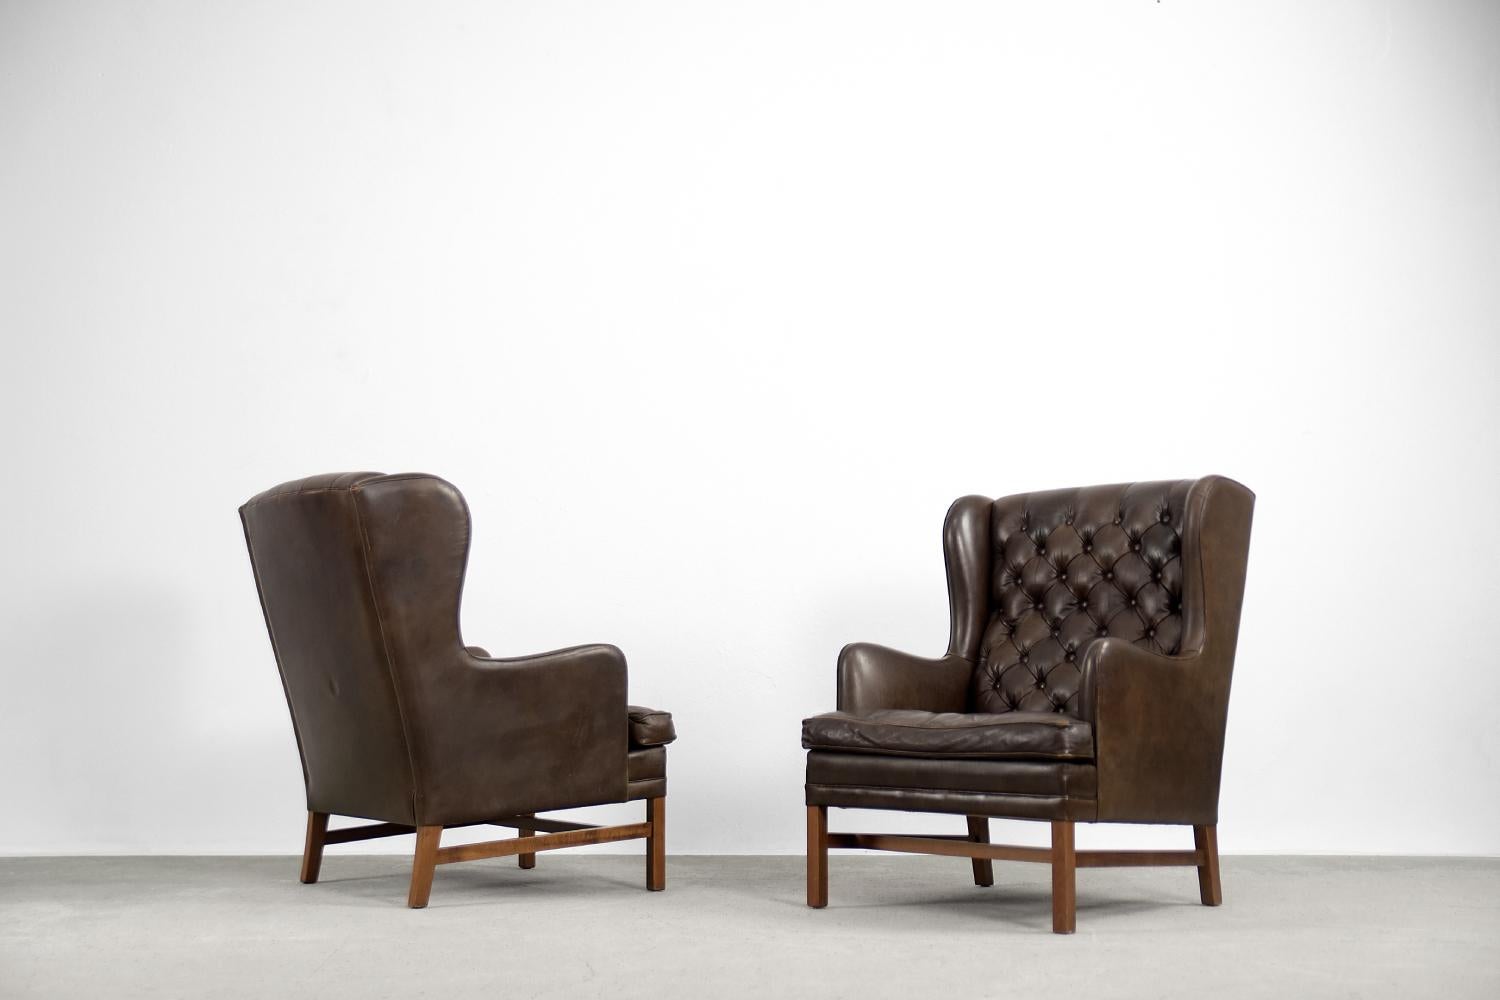 This set of two quilted wing chairs was manufactured in Sweden by OPE Möbler during the 1960s. The armchairs were upholstered in natural leather in dark chocolate colour. The back is high and contoured. The quilting is made in traditional diamonds